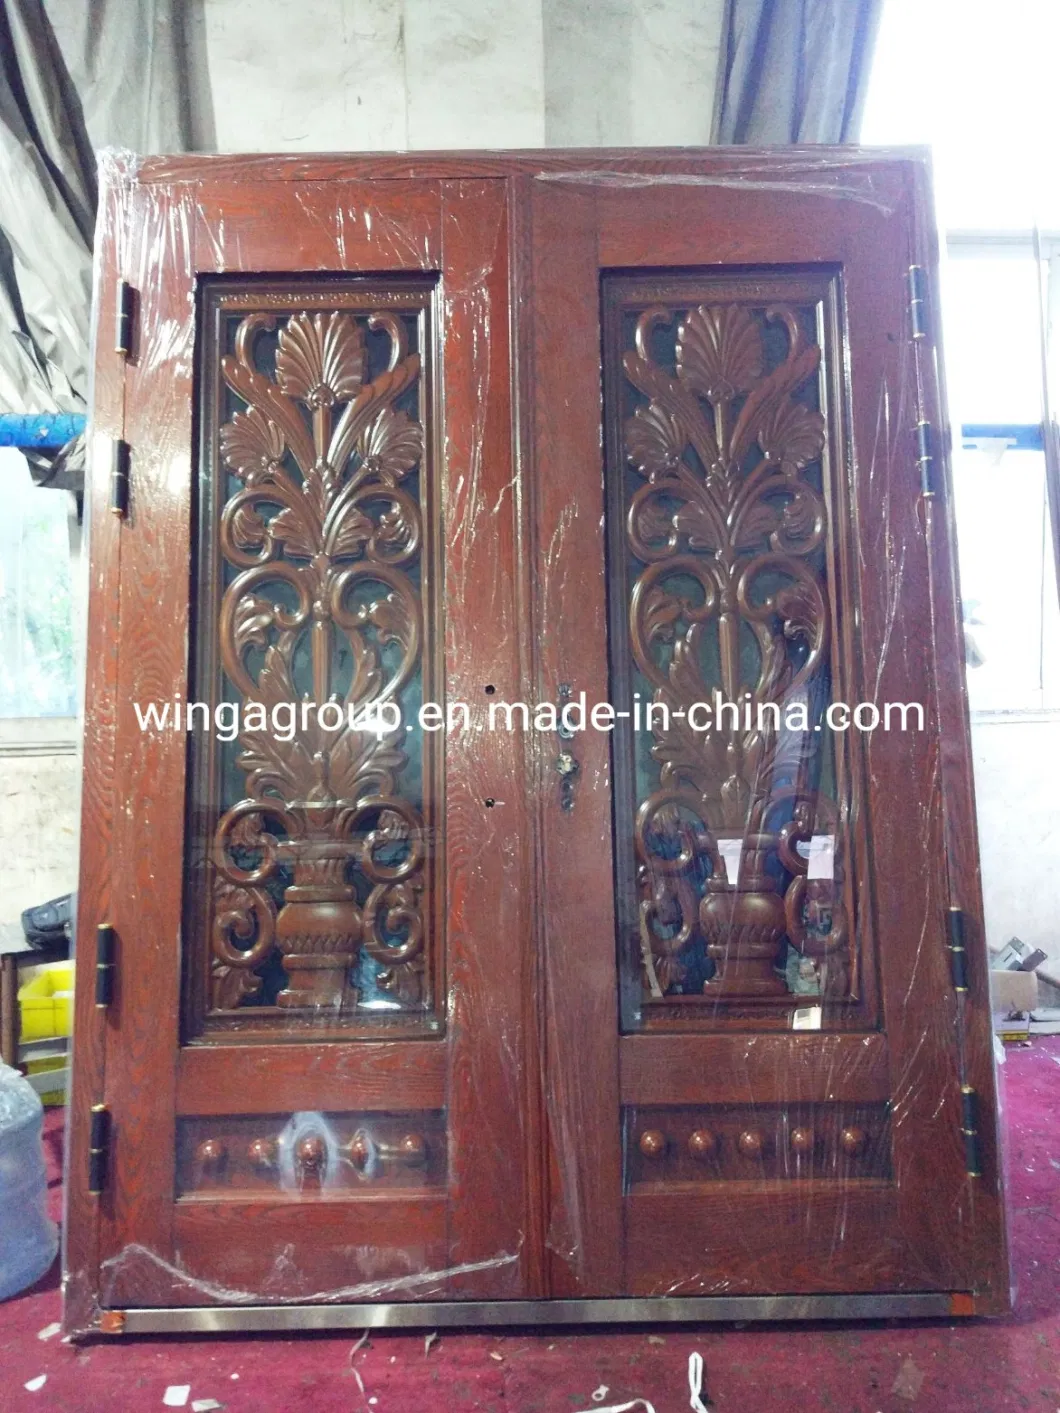 with Window Wrought Iron Entrance Security Glass Copper Door (W-GB-01)